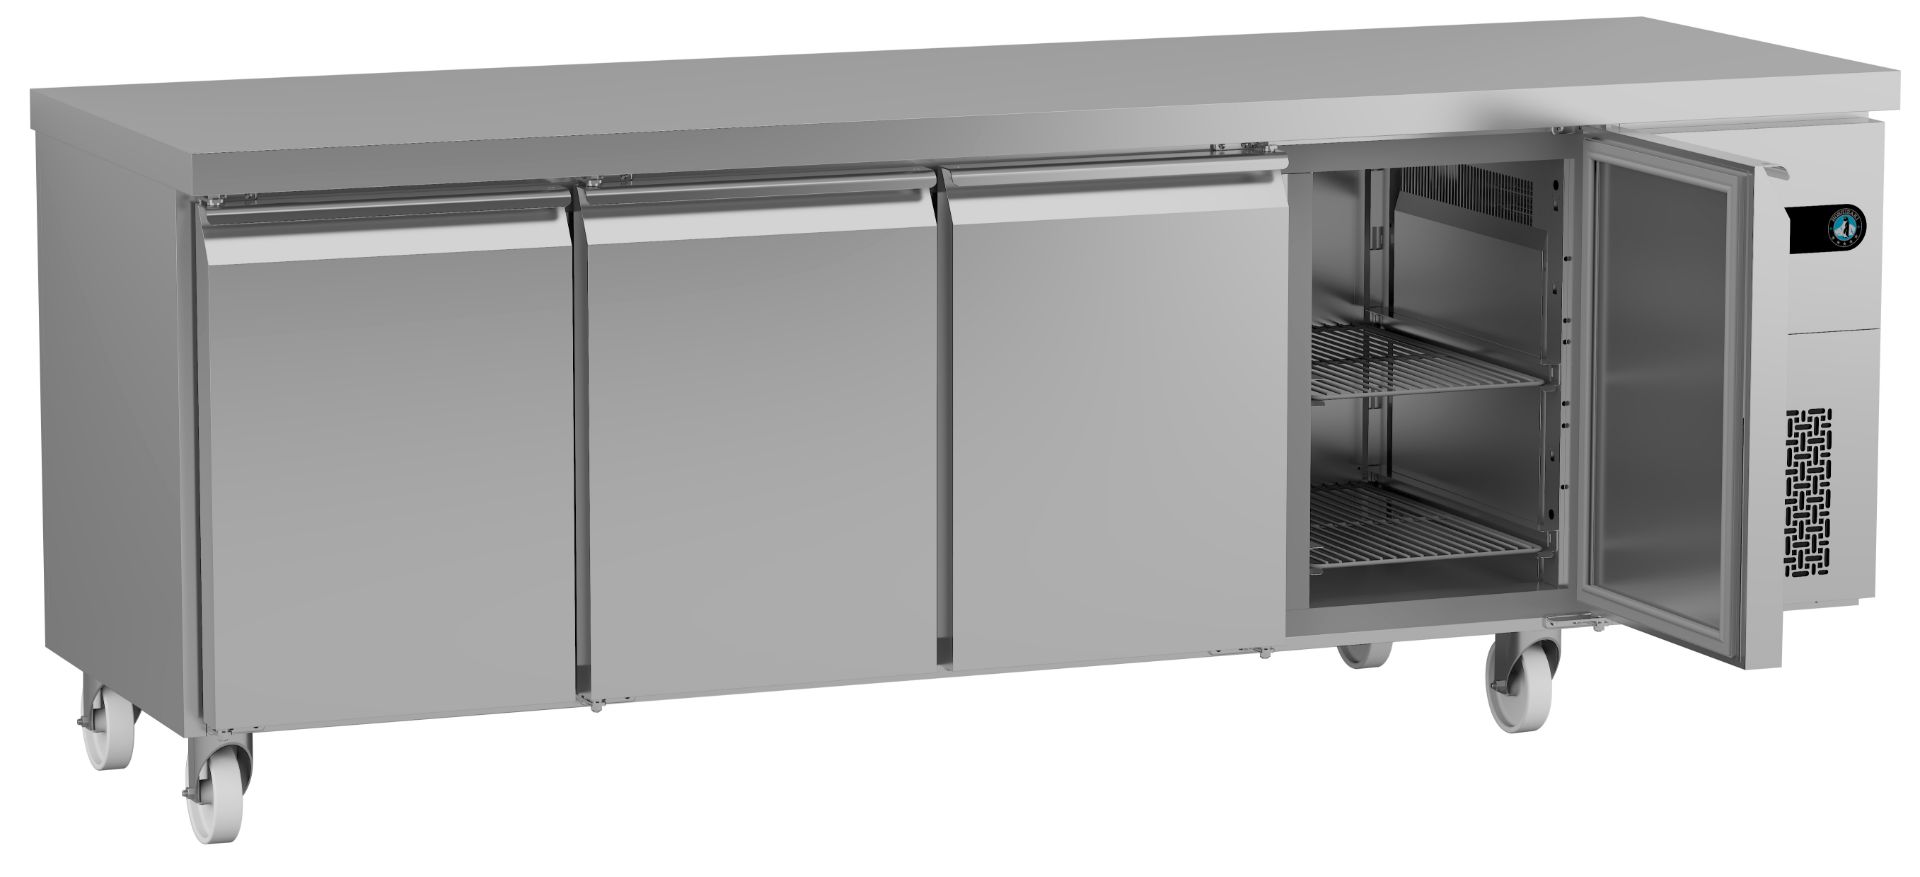 Snowflake Refrigerated Counter SCR-225CHRC-2222-C1 - Image 3 of 4